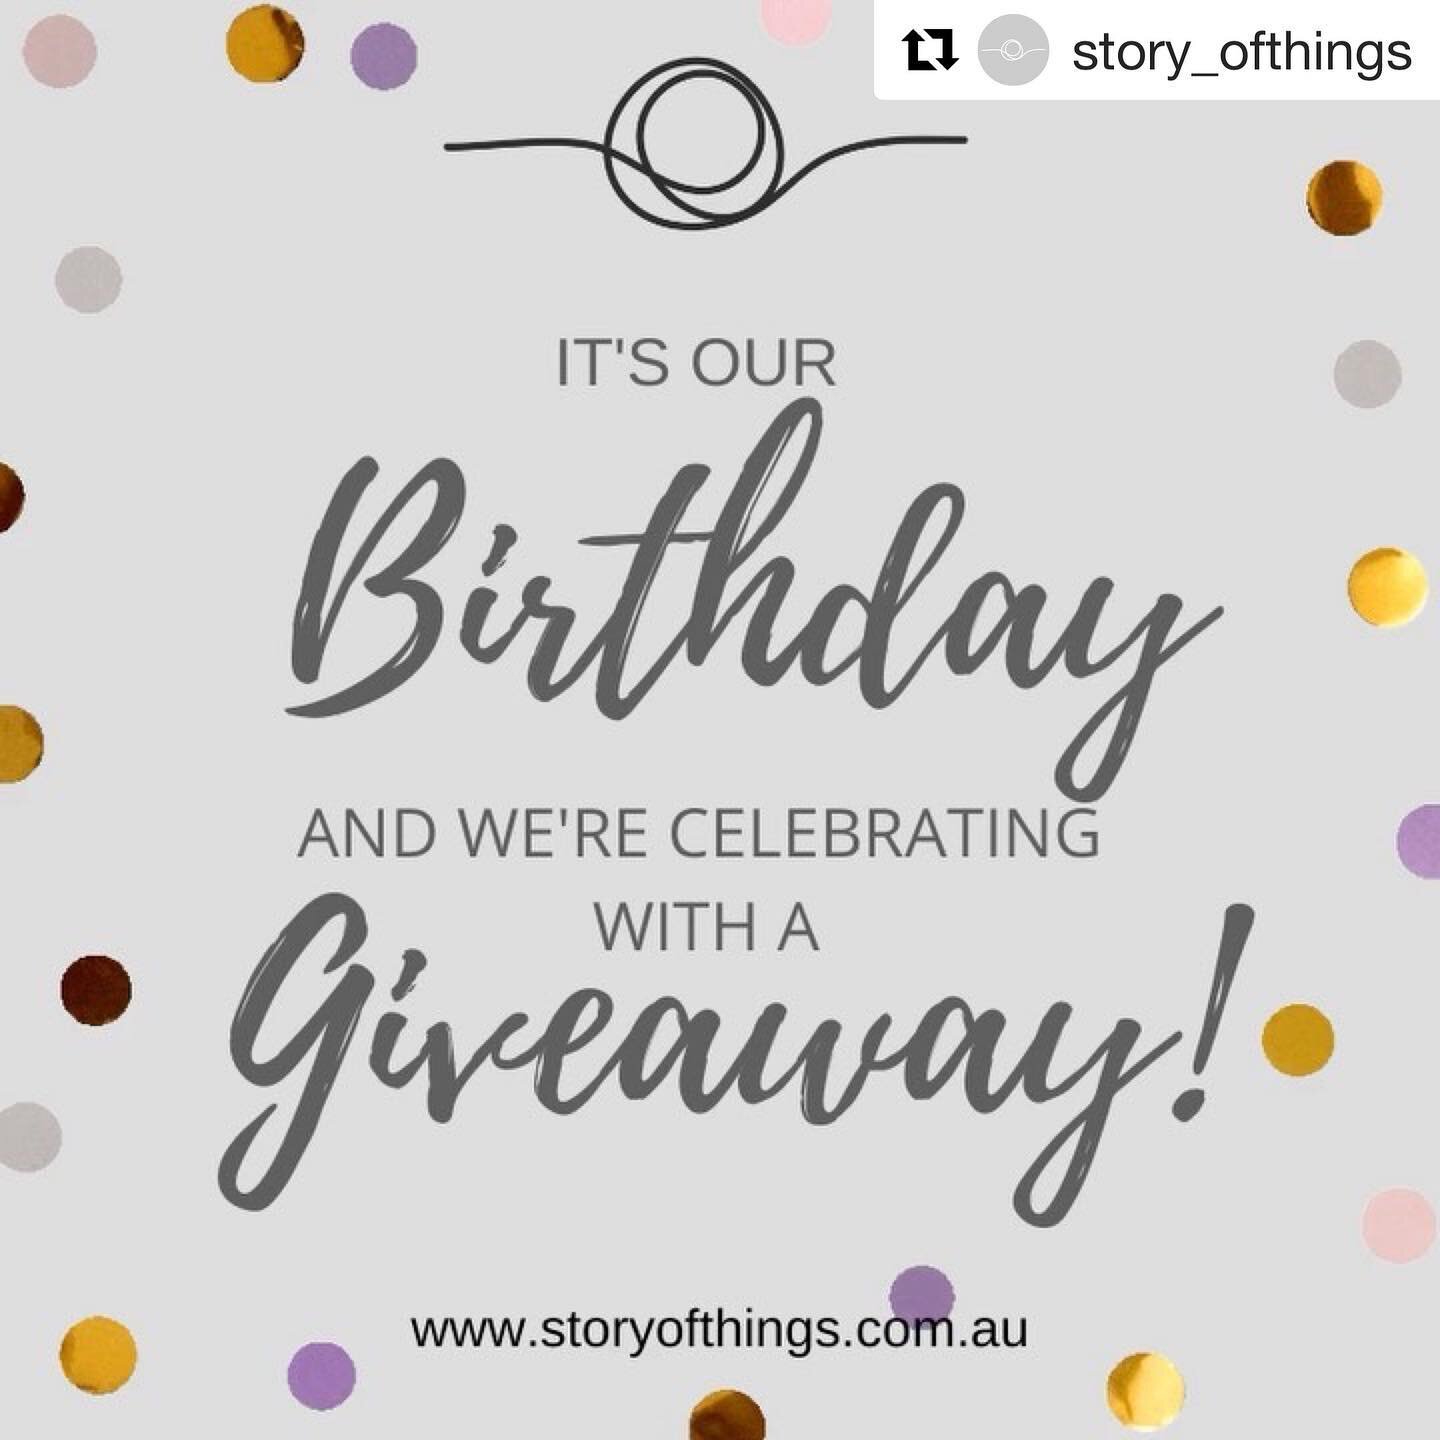 Happy birthday to our other baby that we share with the wonderful interior designer @petrinaturnerdesign
For a chance to win one of 2x $100 birthday voucher pop over to @story_ofthings
・・・
#Repost @story_ofthings
・・・
Hip Hooray, it&rsquo;s our 2nd bi